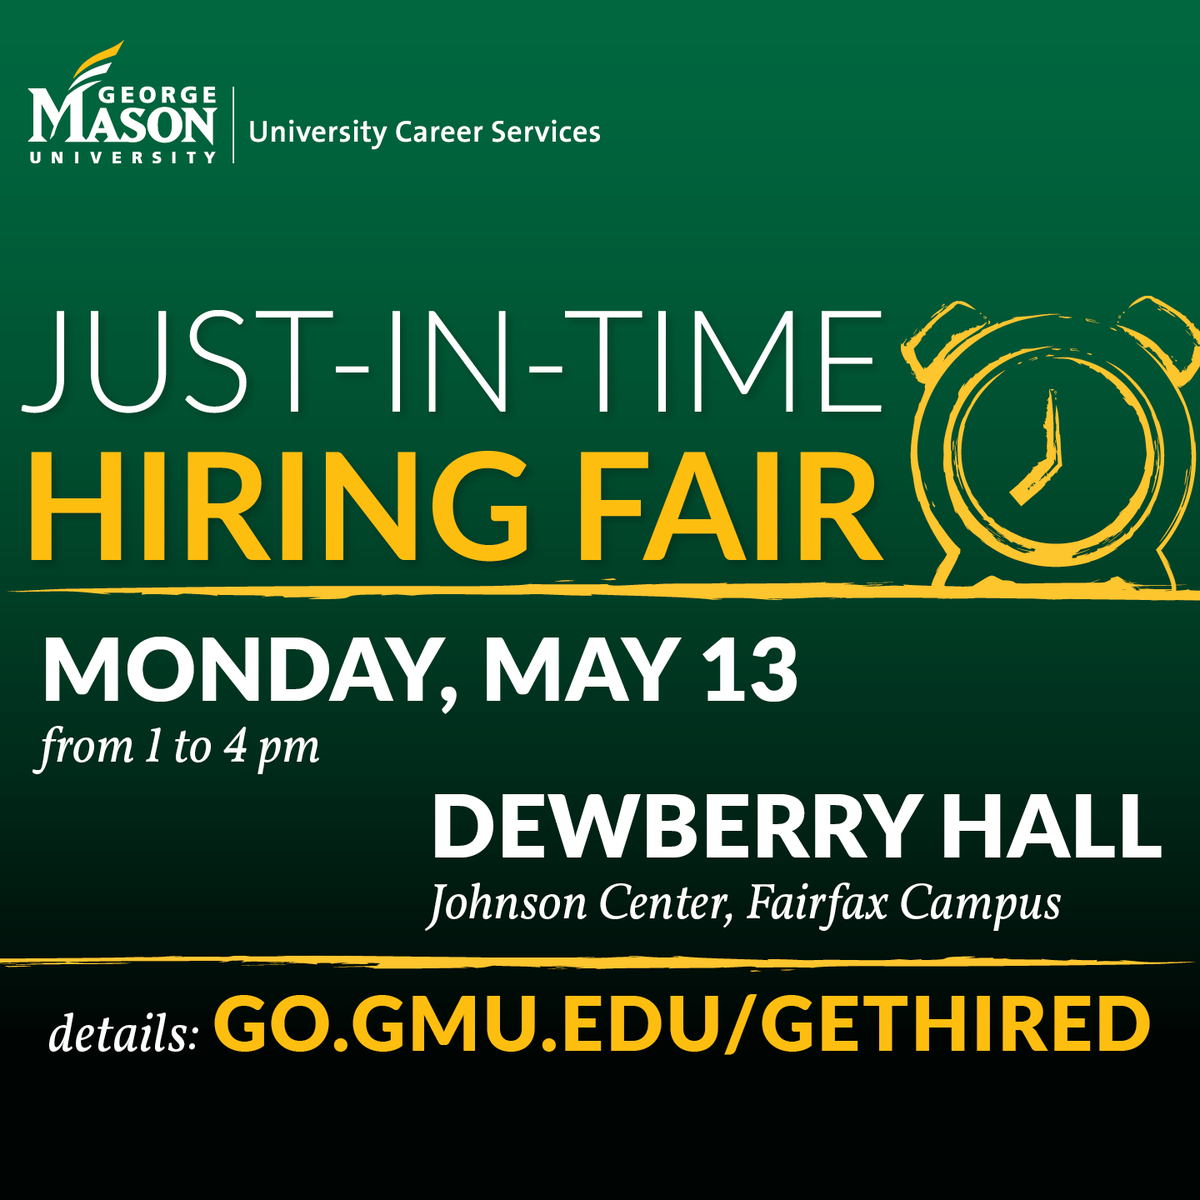 90+ employers will be at @masoncareer’s Just-in-Time Hiring Fair in search of #MasonTalent! Check out the employers and get details for the prep events at go.gmu.edu/GetHired #masonfair #careerfair #bringyourresume #Mason2024